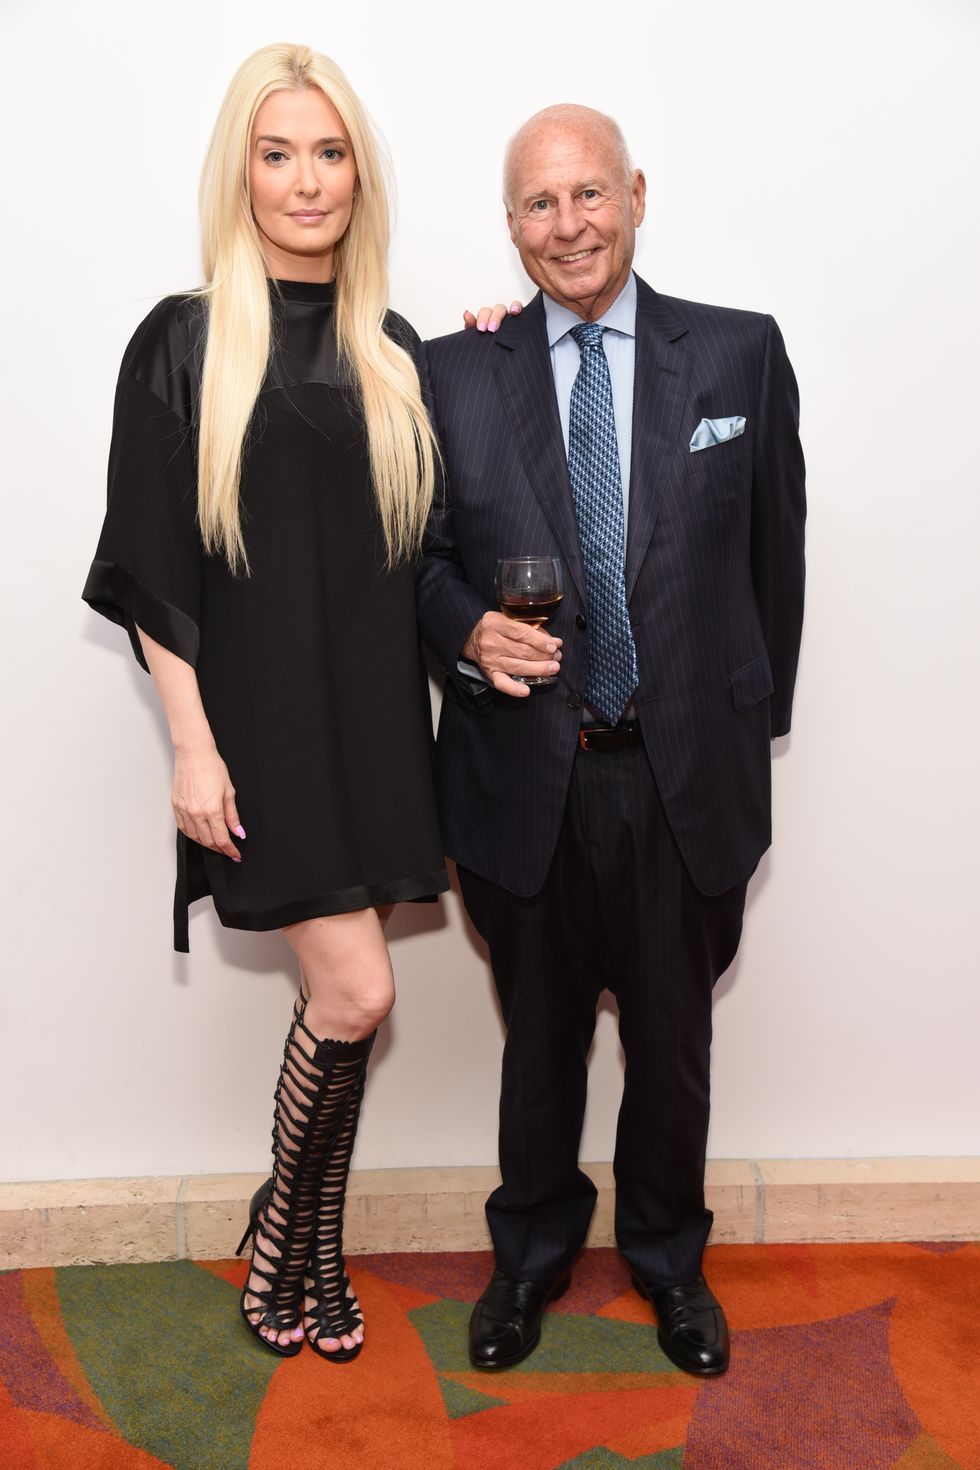 erika girardi and thomas girardi attend the sherman brothers disney music   the 7th annual concert extraordinaire   los angeles lawyers philharmonic on june 18, 2016 at walt disney concert hall in los angeles, usa photo by steve eichner  please use credit from credit field